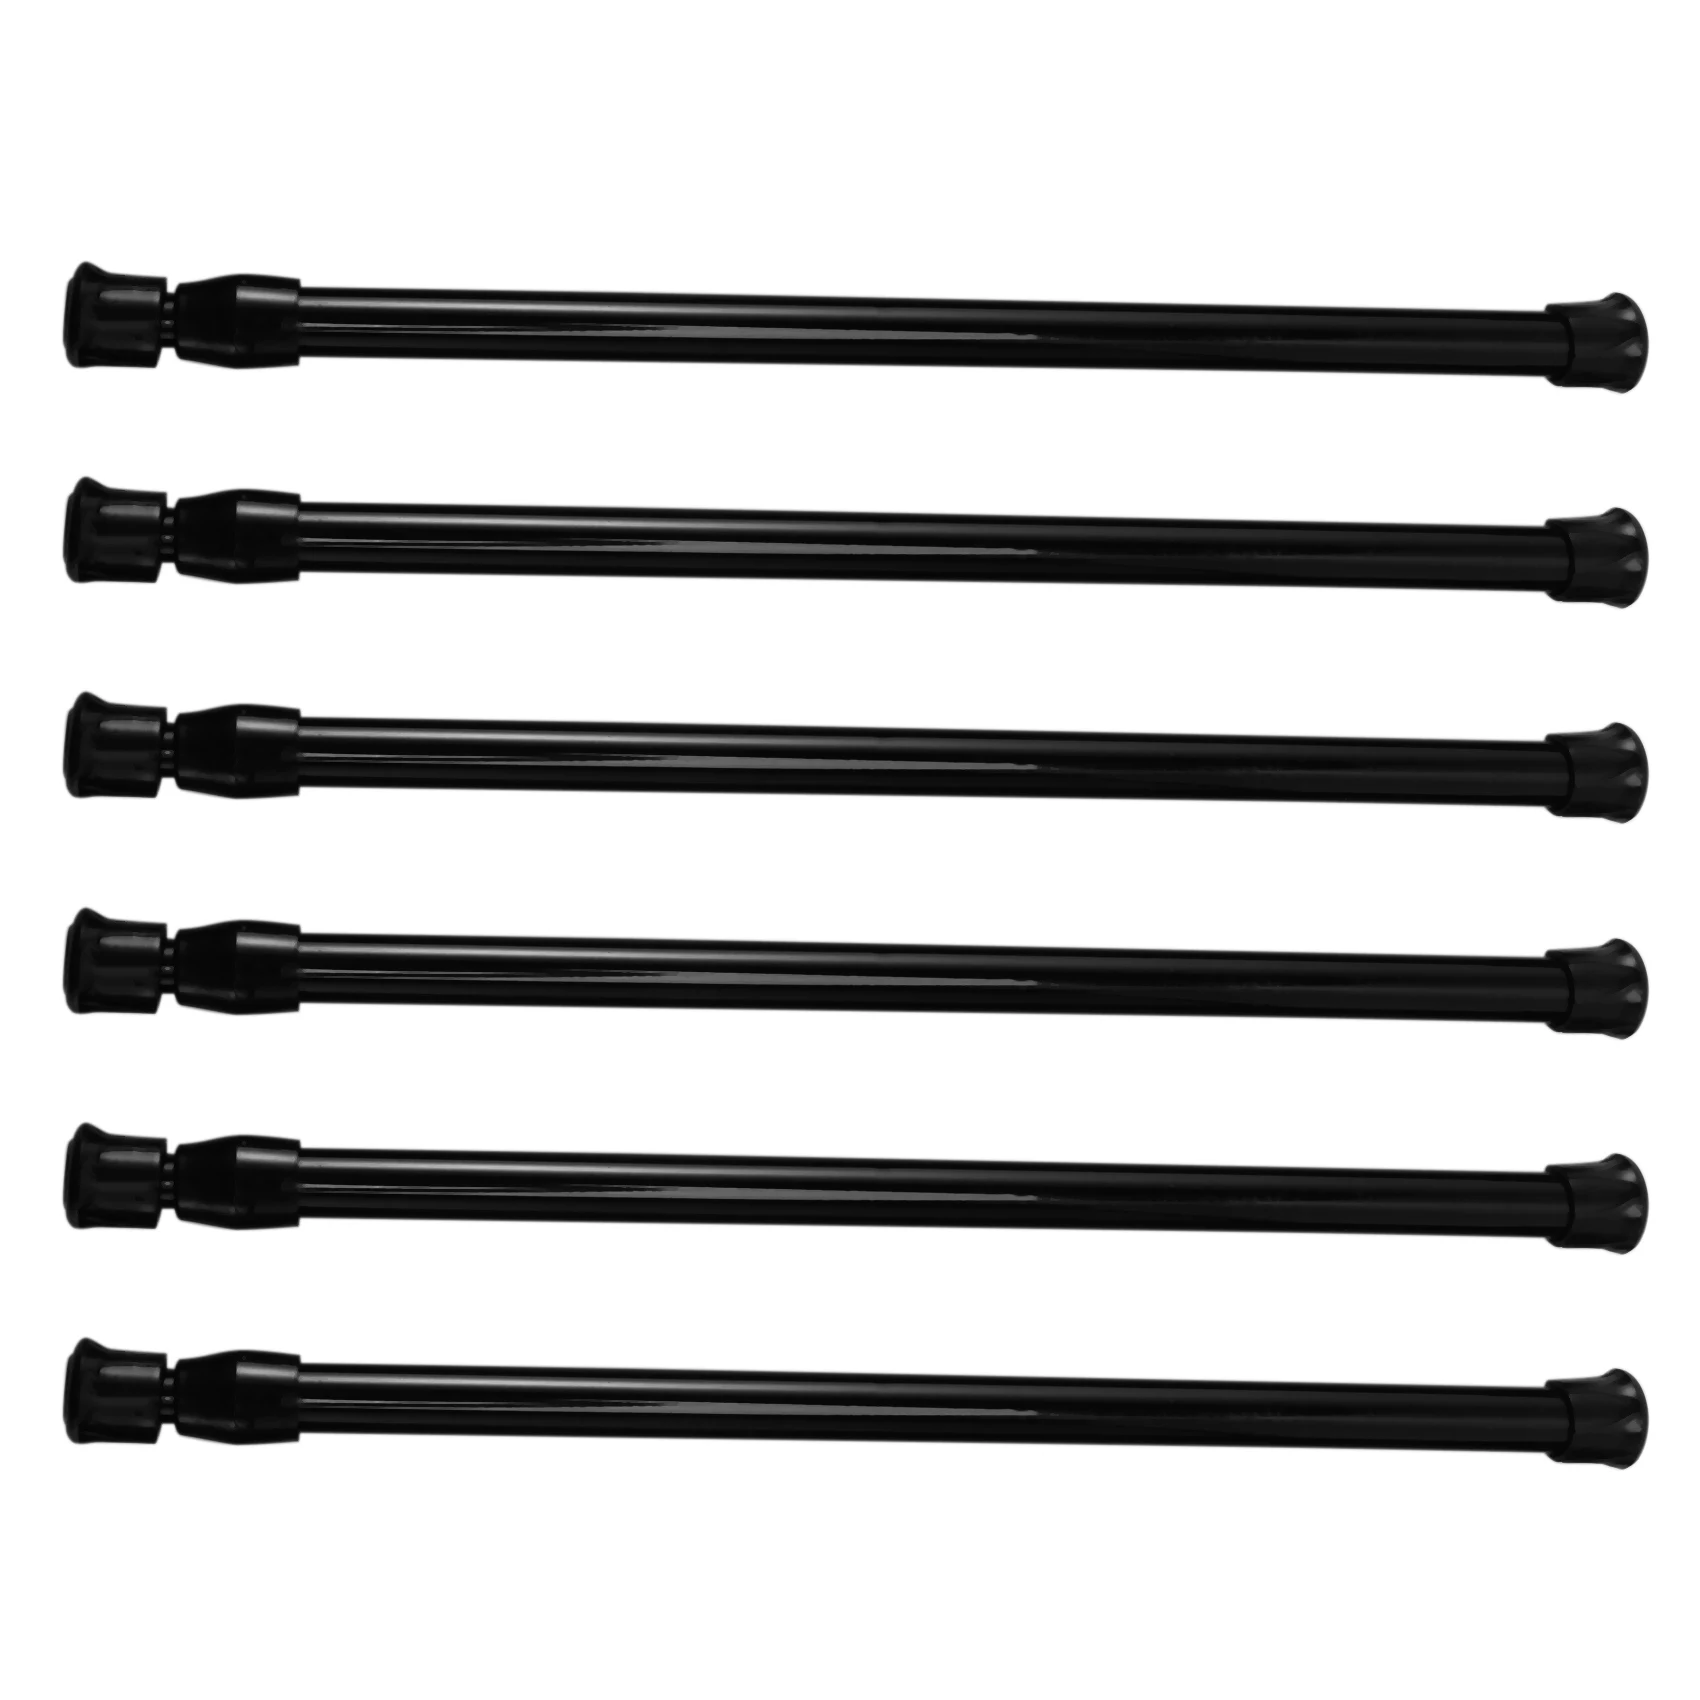 

Small Tension Rods for Cabinets Cupboard Bars for RV Closets Refrigerator, Spring Rods 11.8 to 19.6 Inches, 6 Packs (Black)